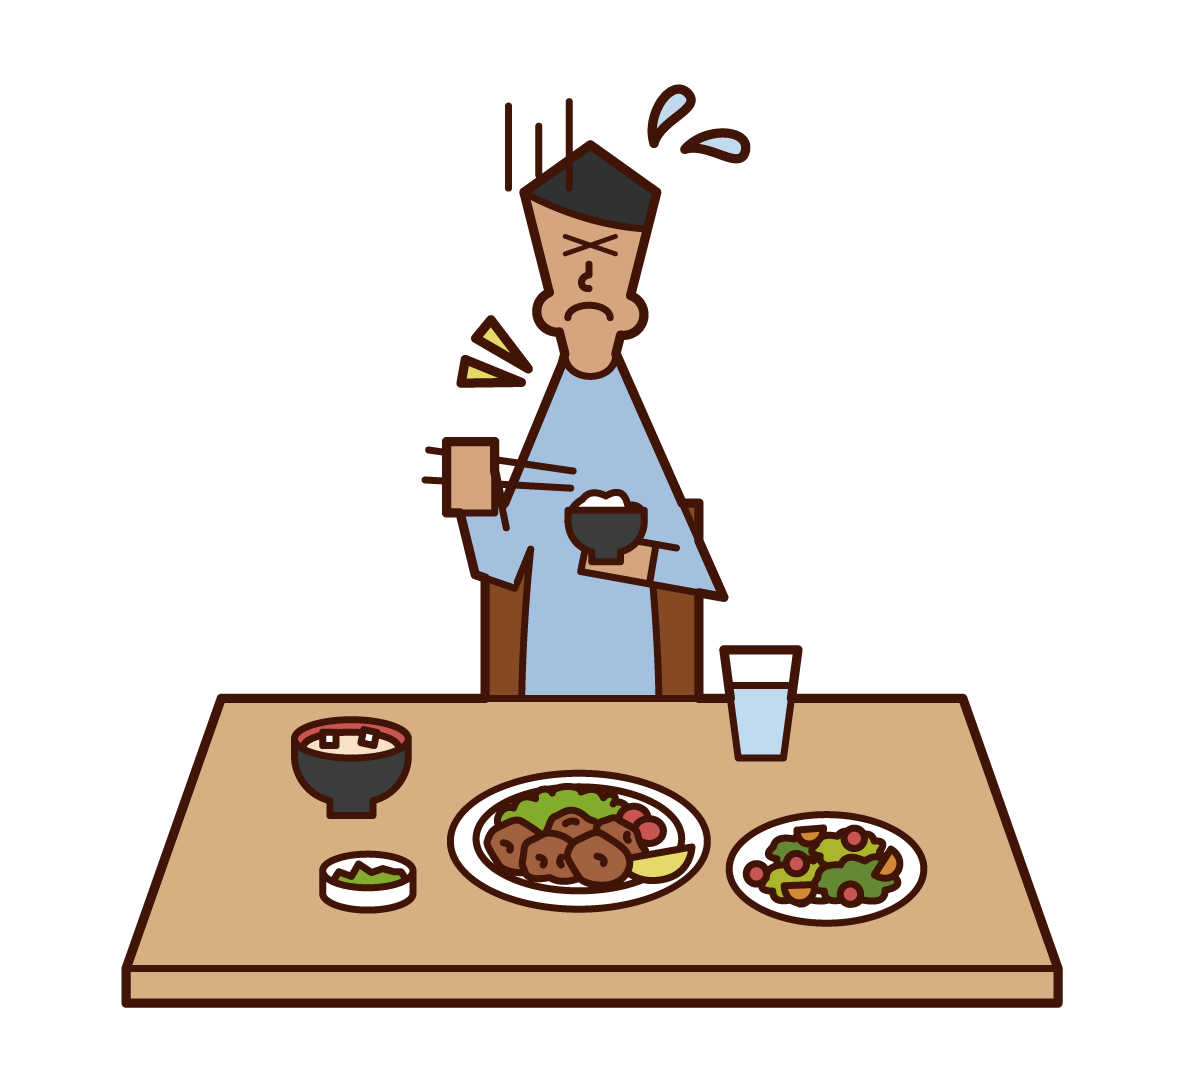 Illustration of a man with food stuck in his throat